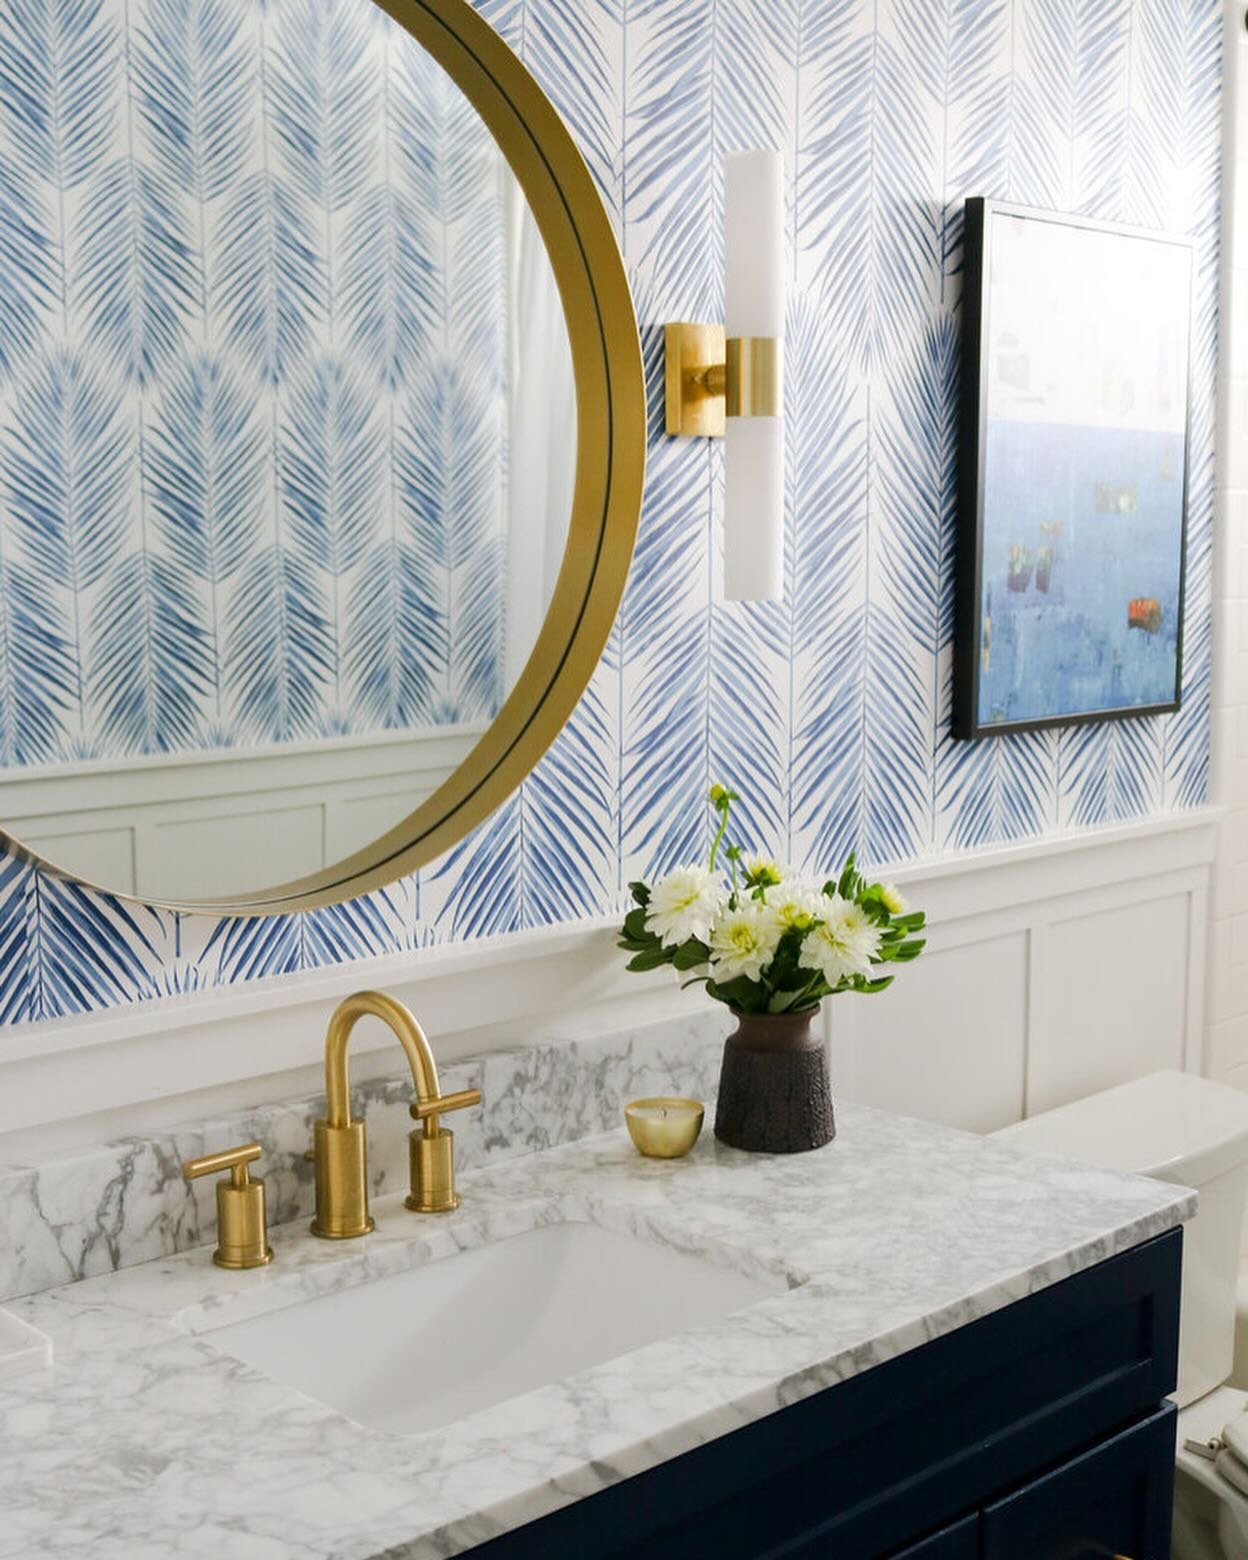 One on my favorite type of makeovers is the &lsquo;no-demo-reno&rsquo; no sledgehammer required, only creative ideas and good bones. 

That&rsquo;s how we have our guest bathroom a major update, with a series or DIY projects &amp; calling in an elect